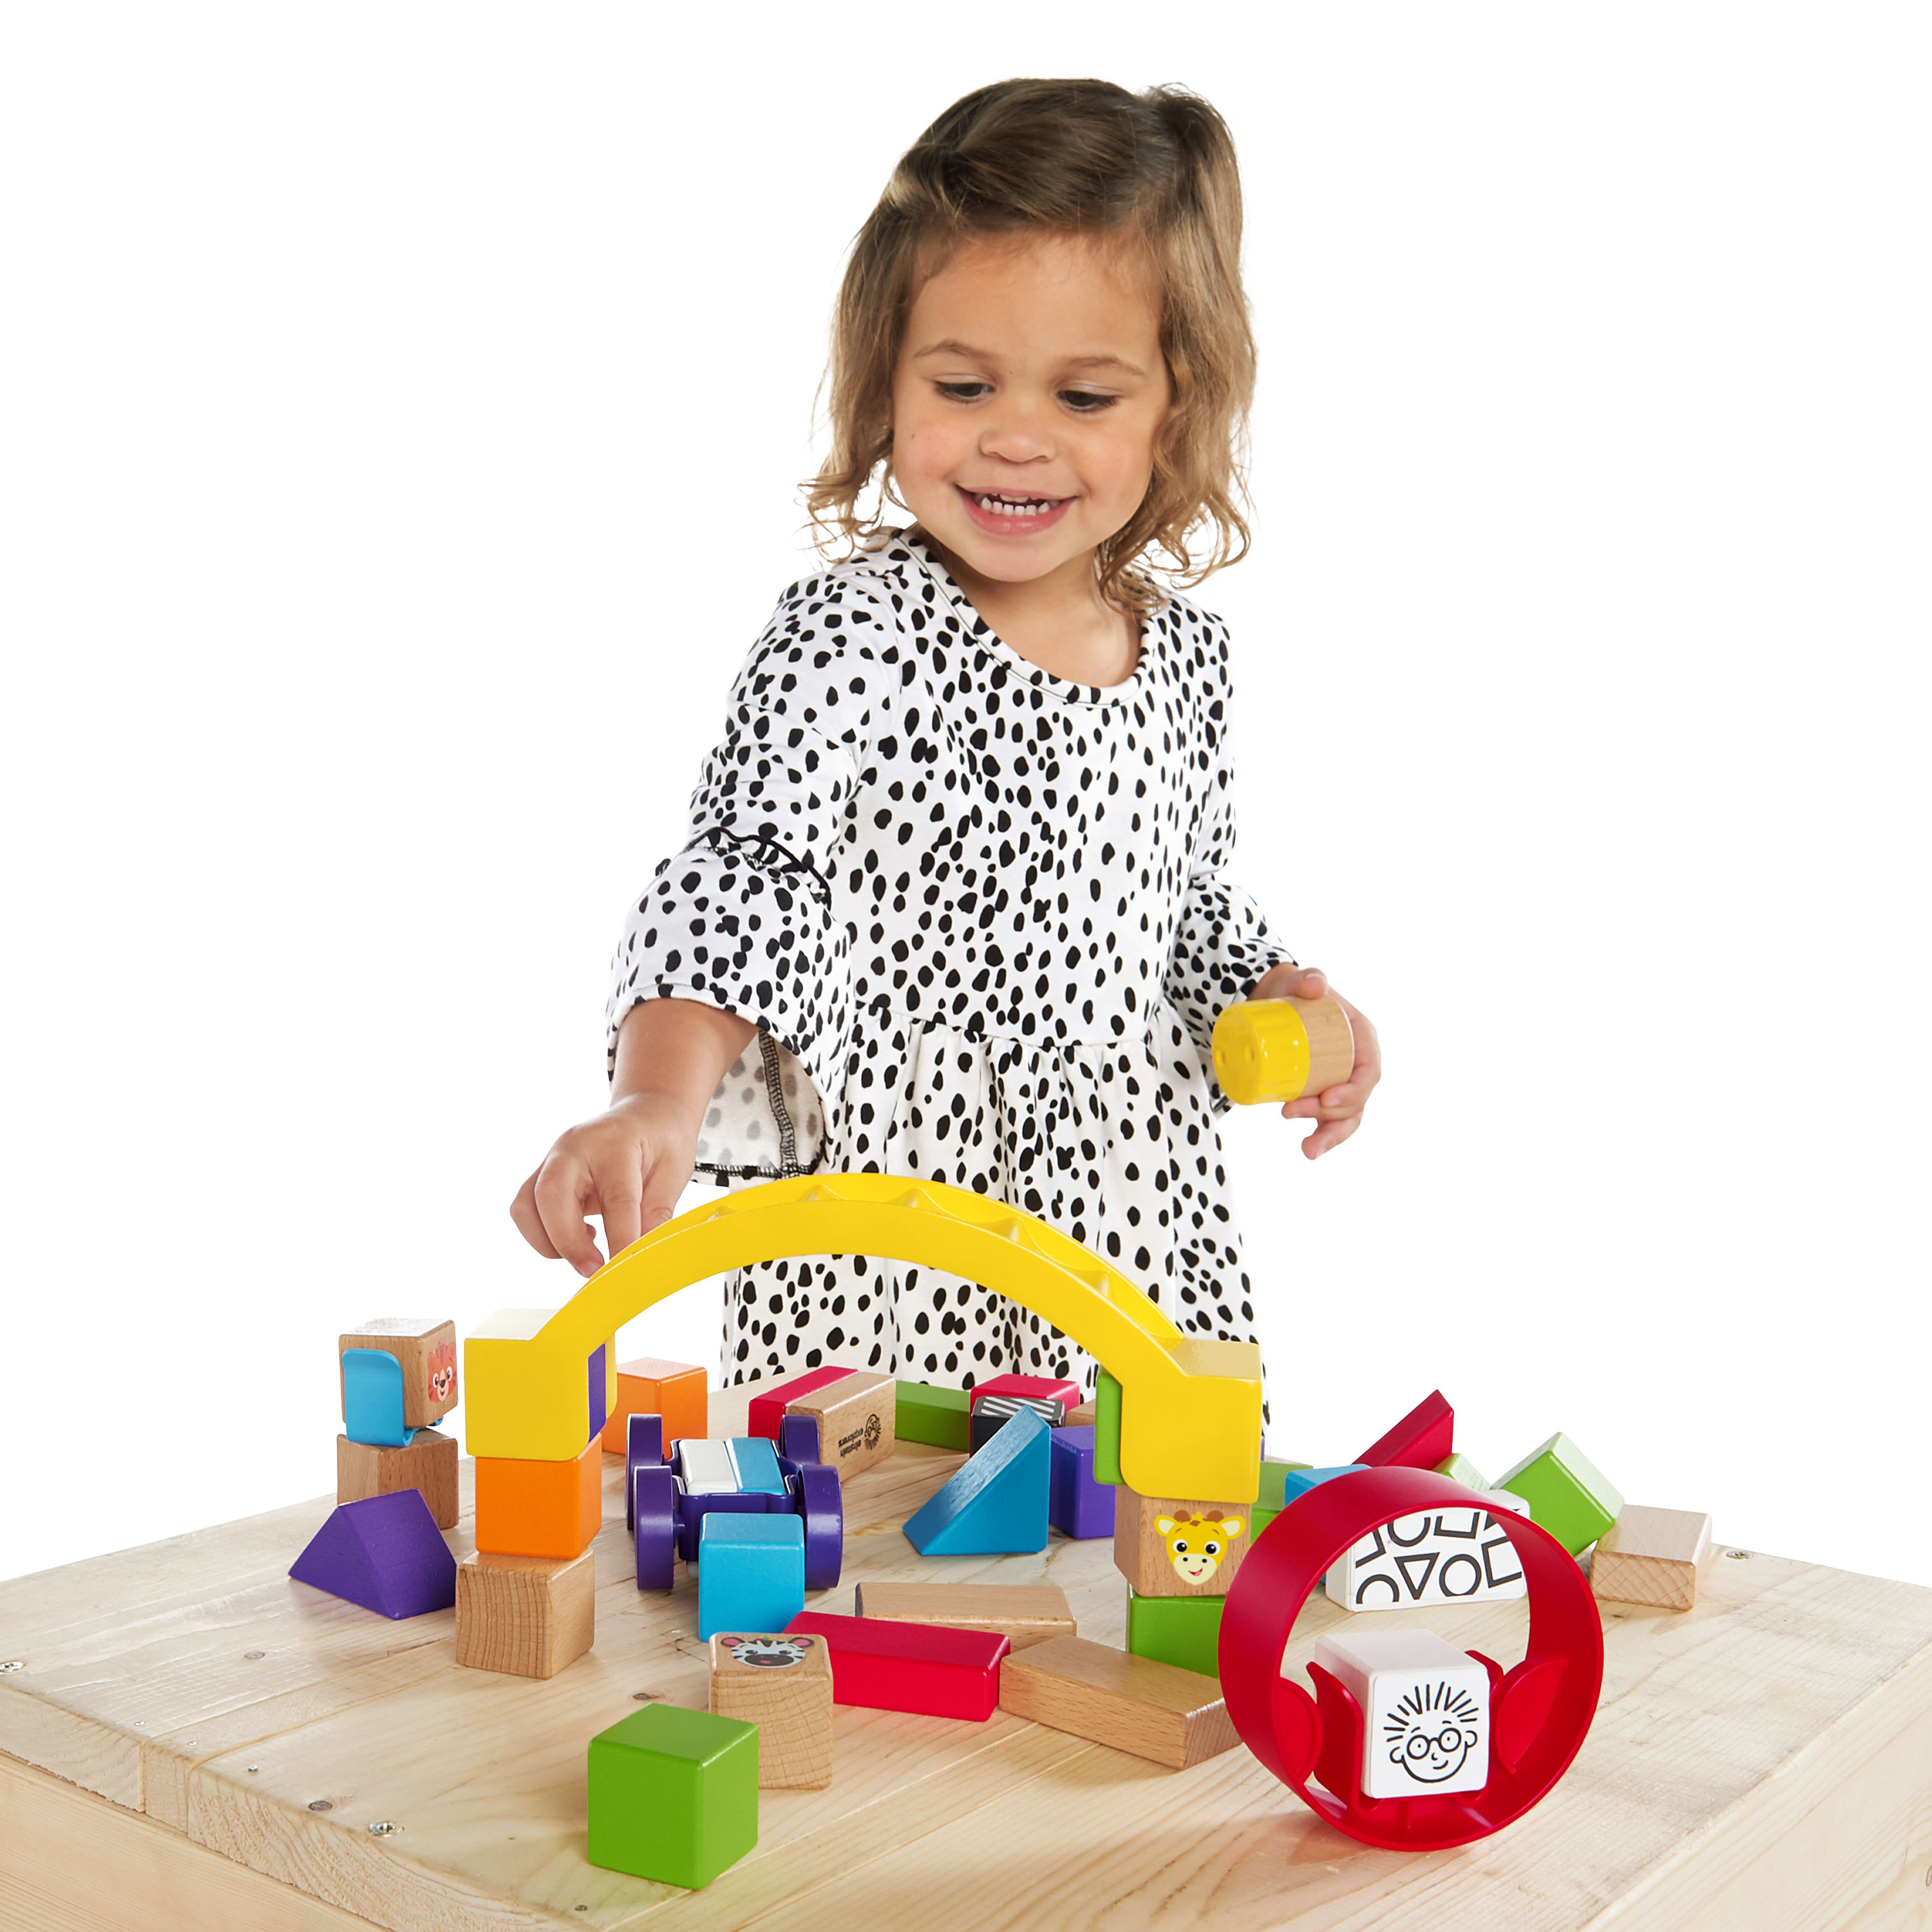 Baby Einstein Curious Creator Kit Wooden Blocks Discovery 40 Piece Toy Set, Ages 12 months + - image 3 of 17